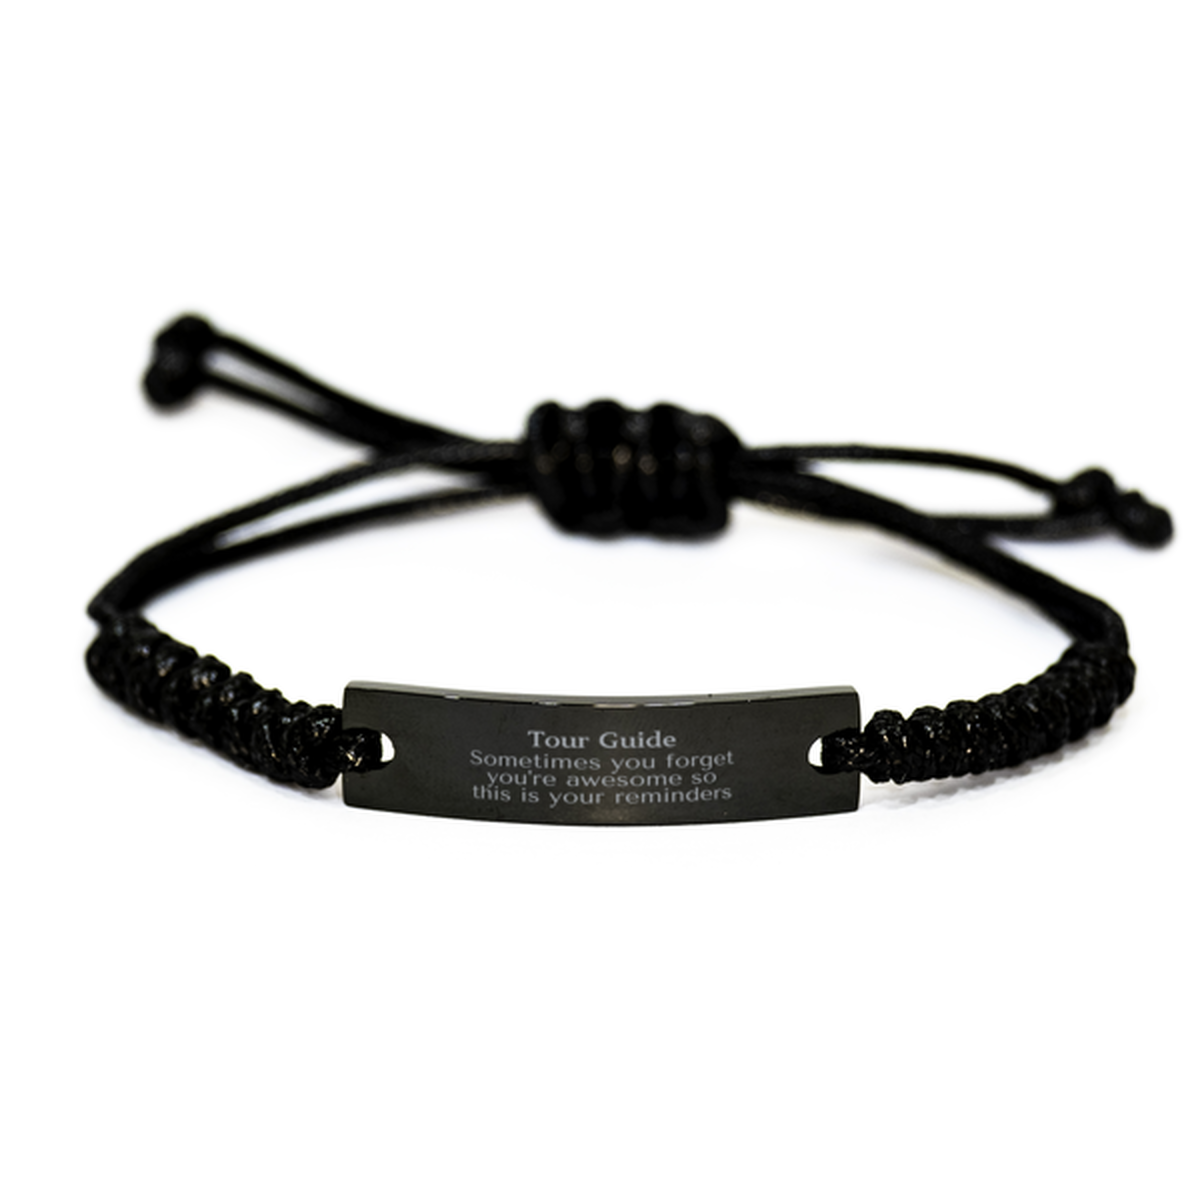 Sentimental Tour Guide Black Rope Bracelet, Tour Guide Sometimes you forget you're awesome so this is your reminders, Graduation Christmas Birthday Gifts for Tour Guide, Men, Women, Coworkers